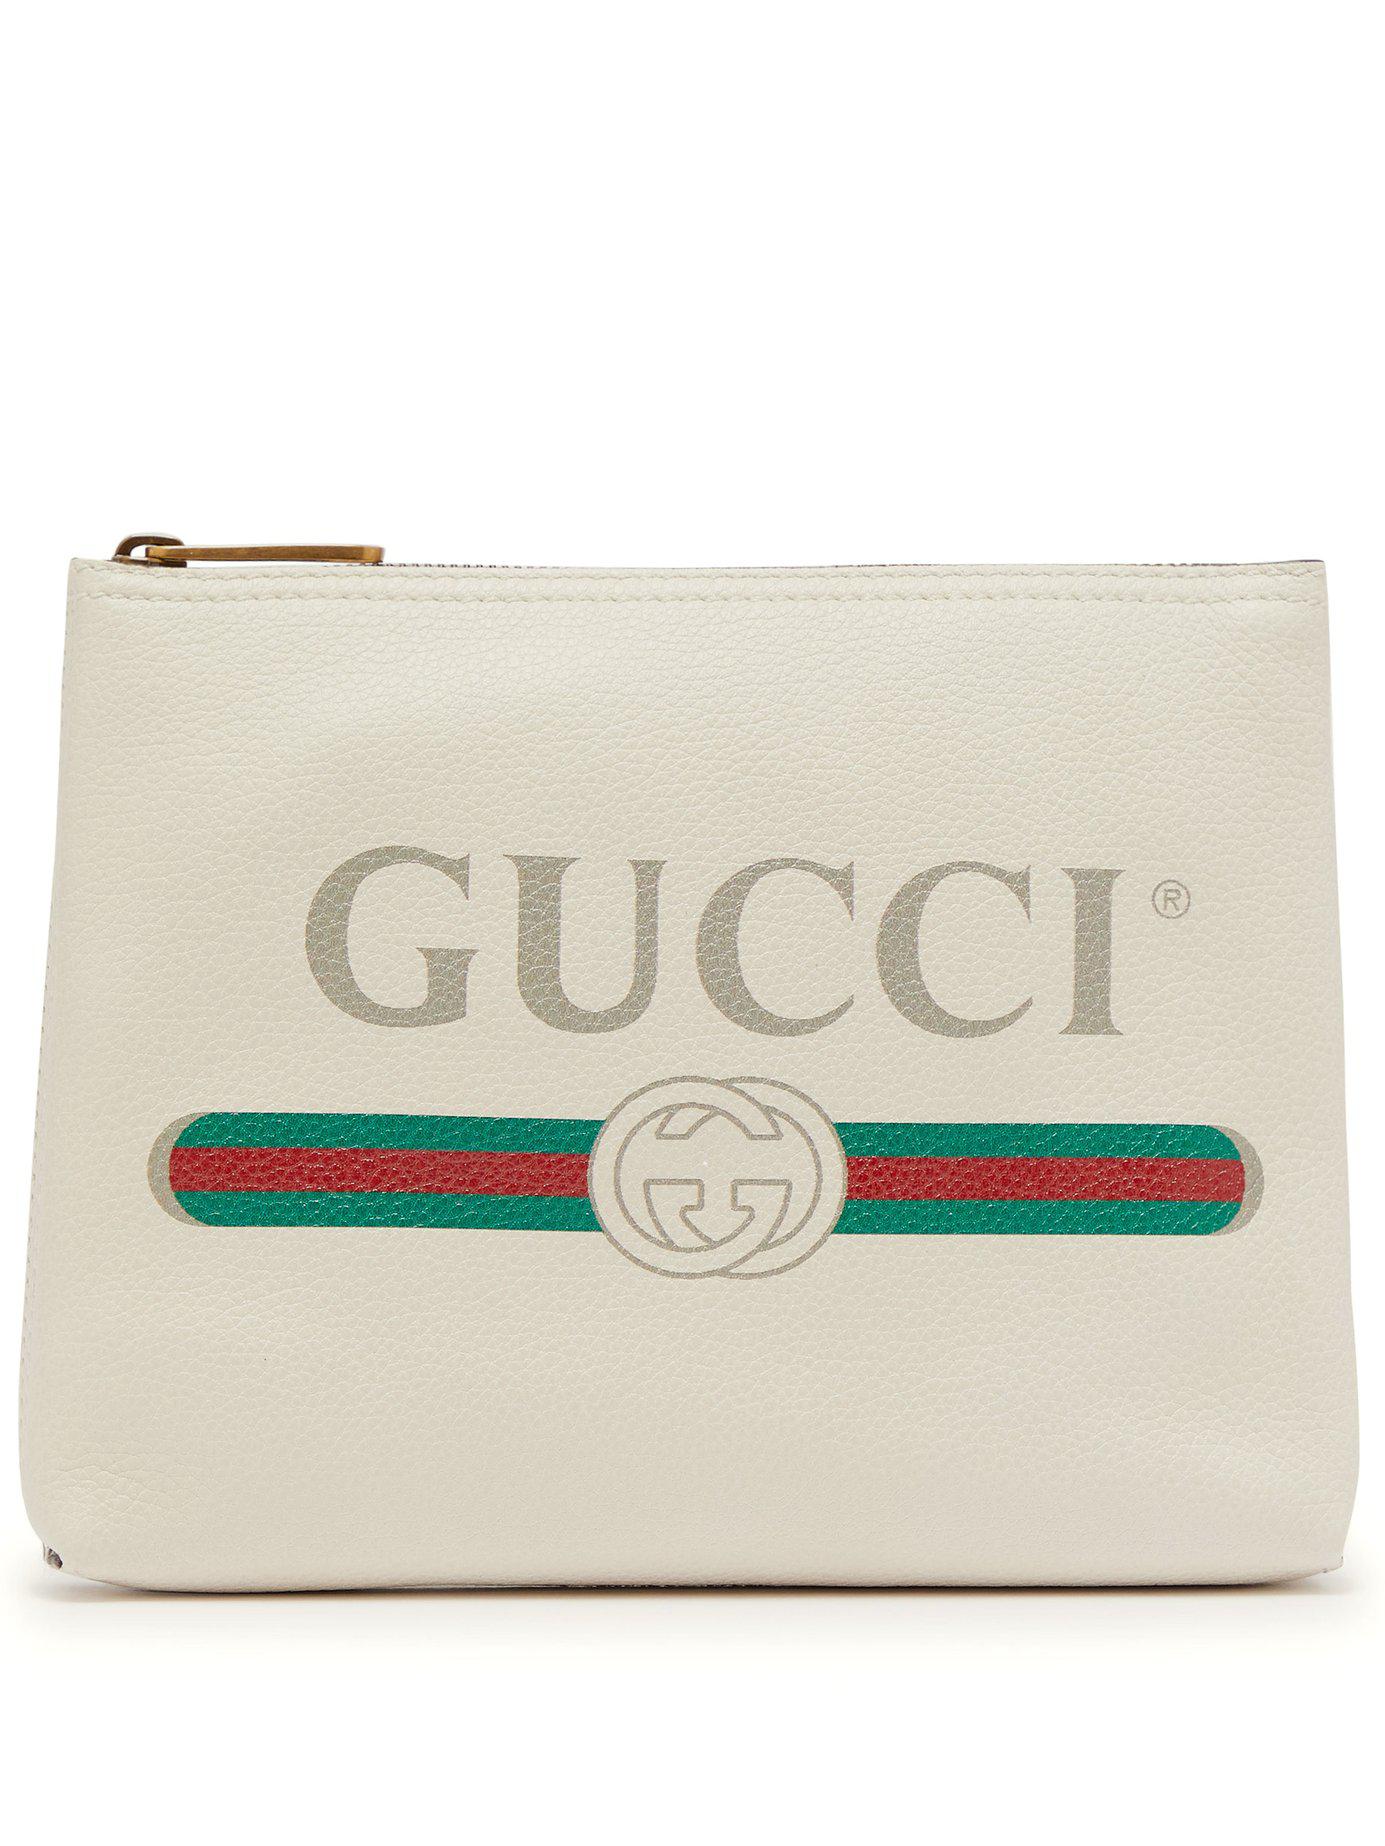 Gucci Logo Printed Leather Pouch in 